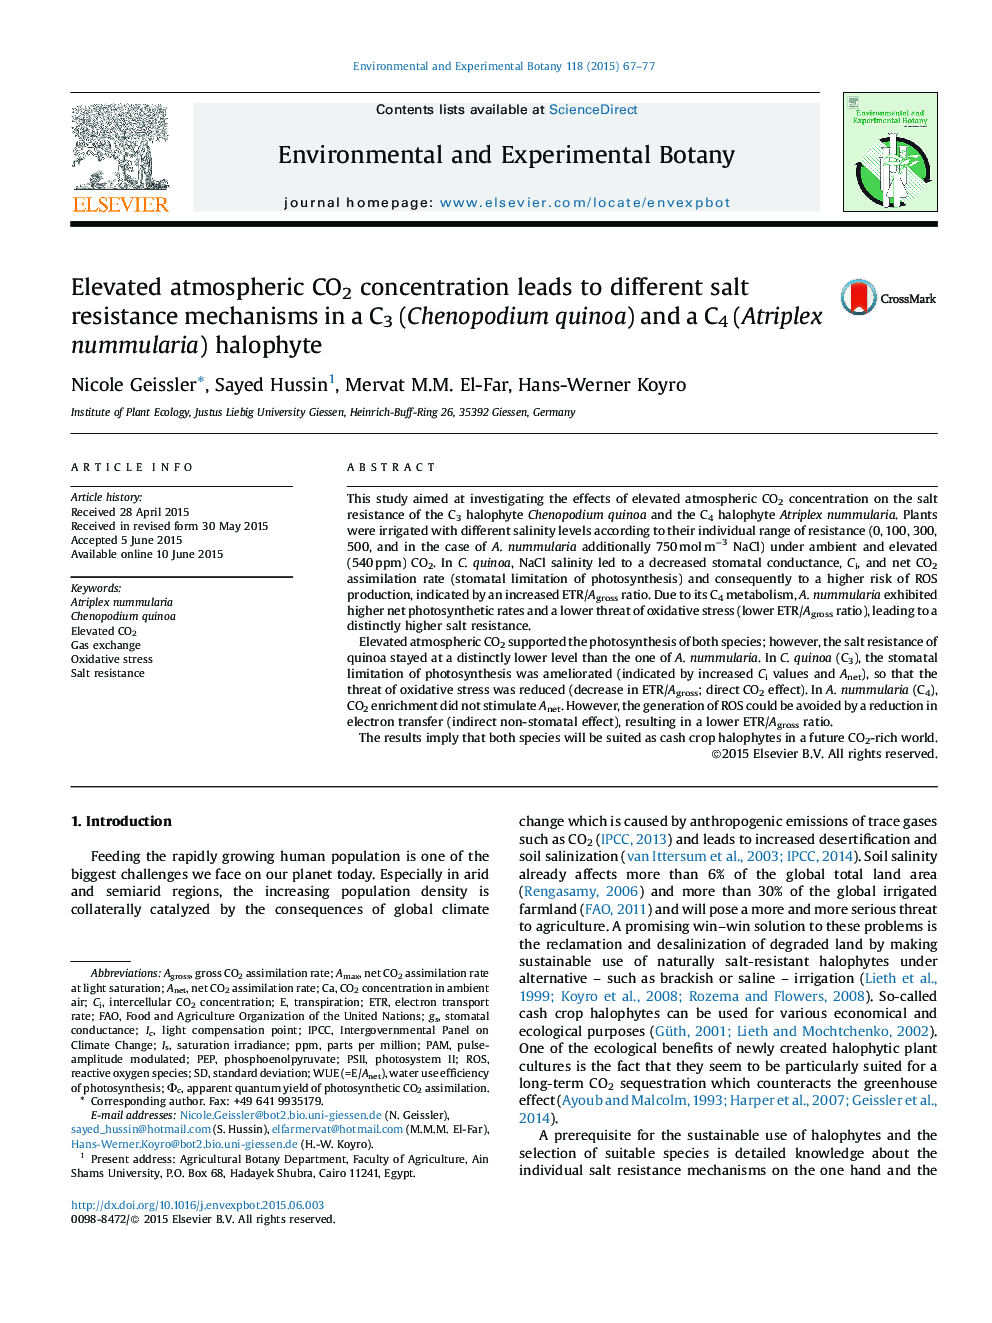 Elevated atmospheric CO2 concentration leads to different salt resistance mechanisms in a C3 (Chenopodium quinoa) and a C4 (Atriplex nummularia) halophyte